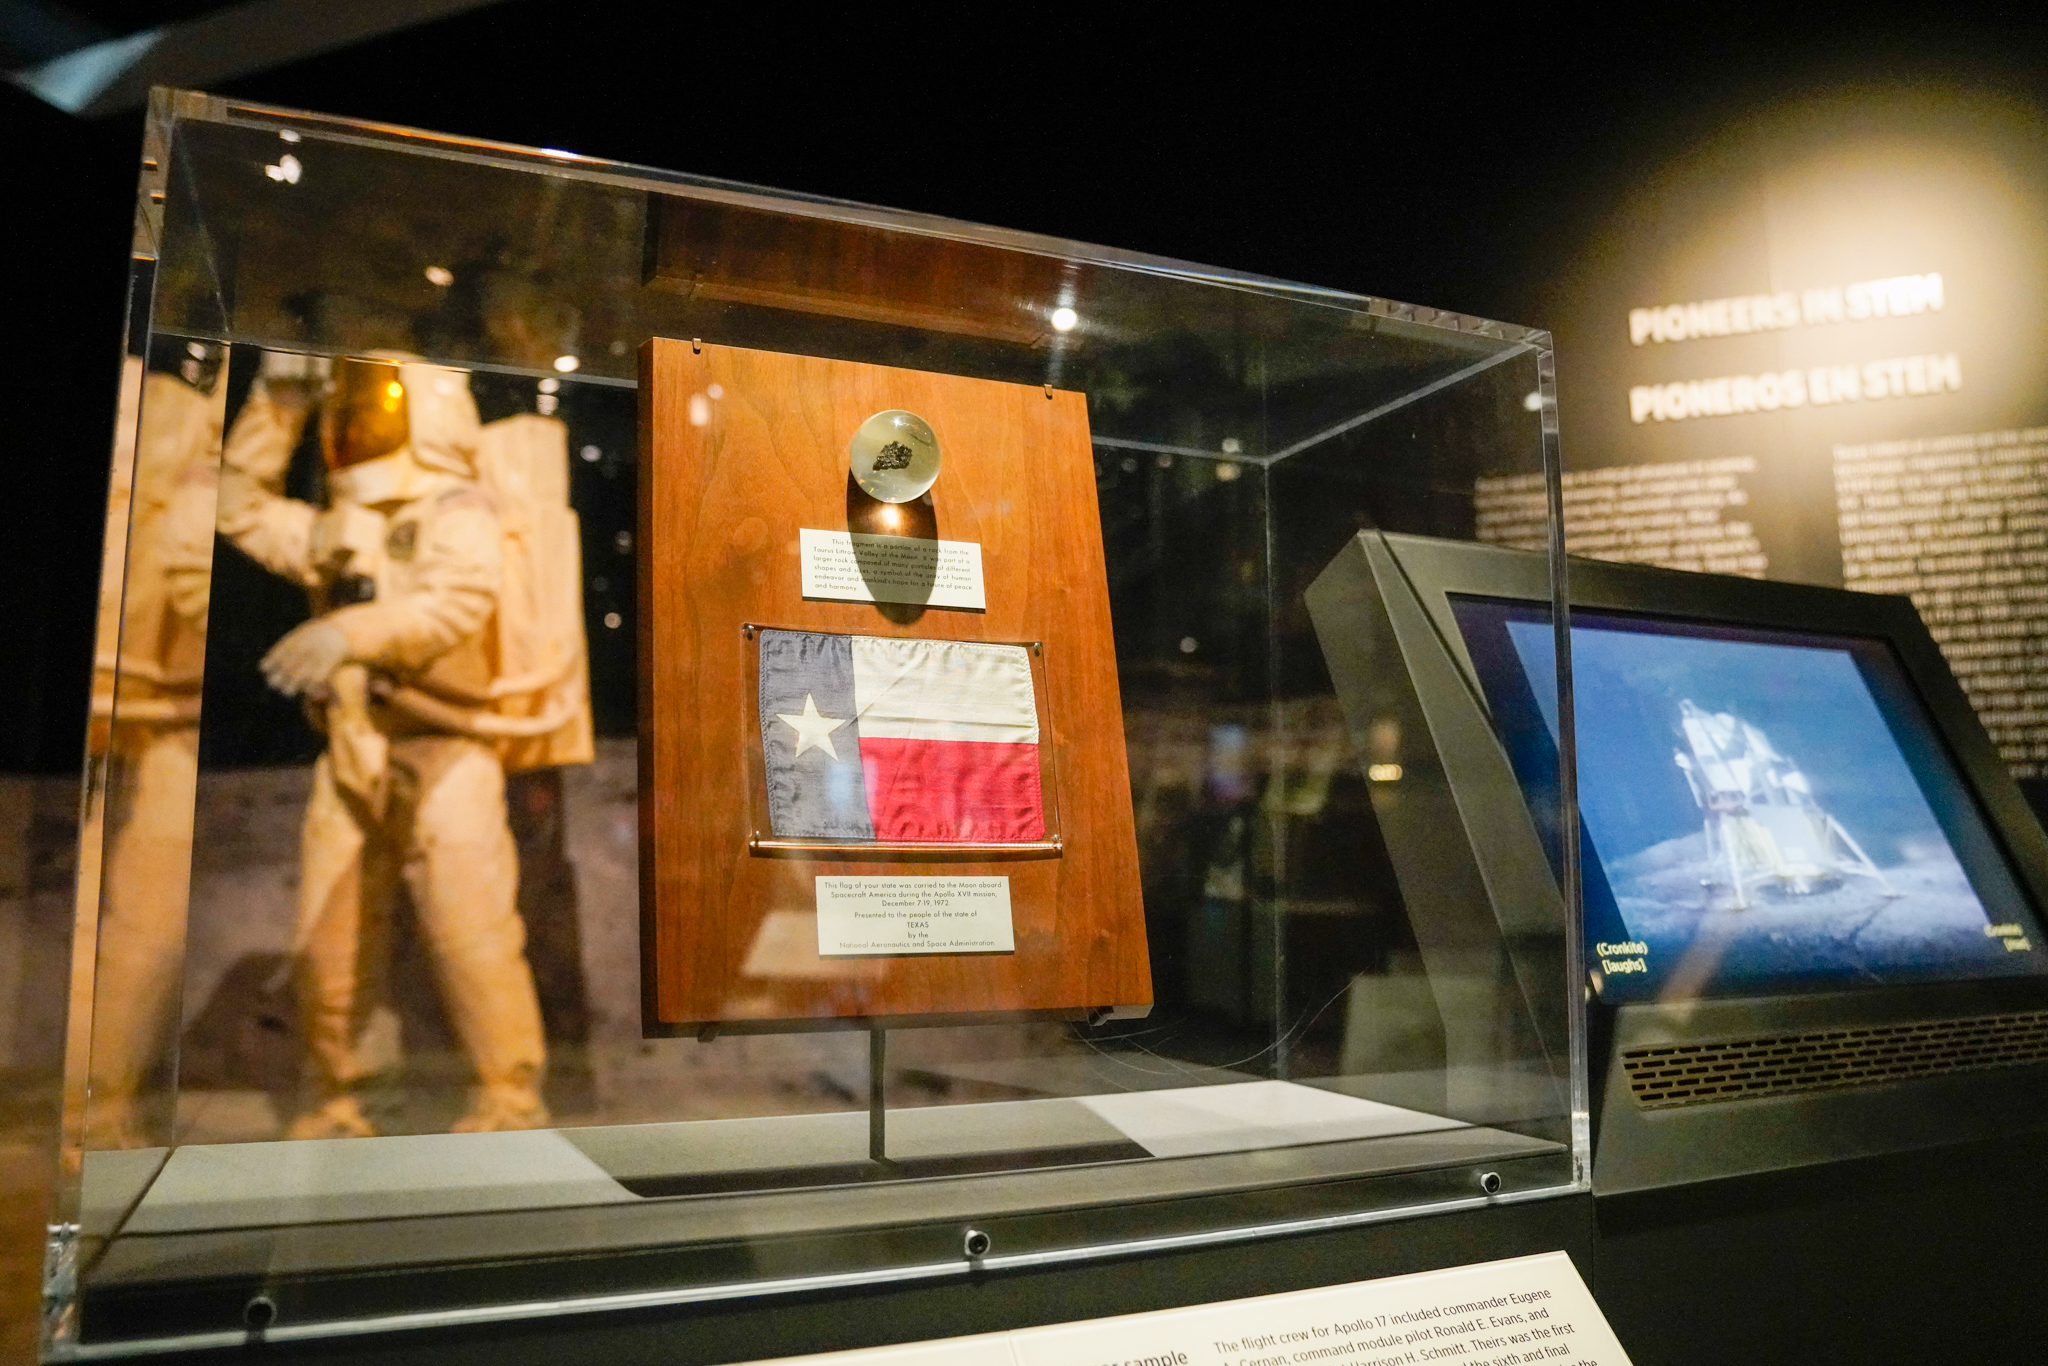 Artifacts from third floor of Museum's Texas History Galleries include a lunar rock sample and moon landing diorama